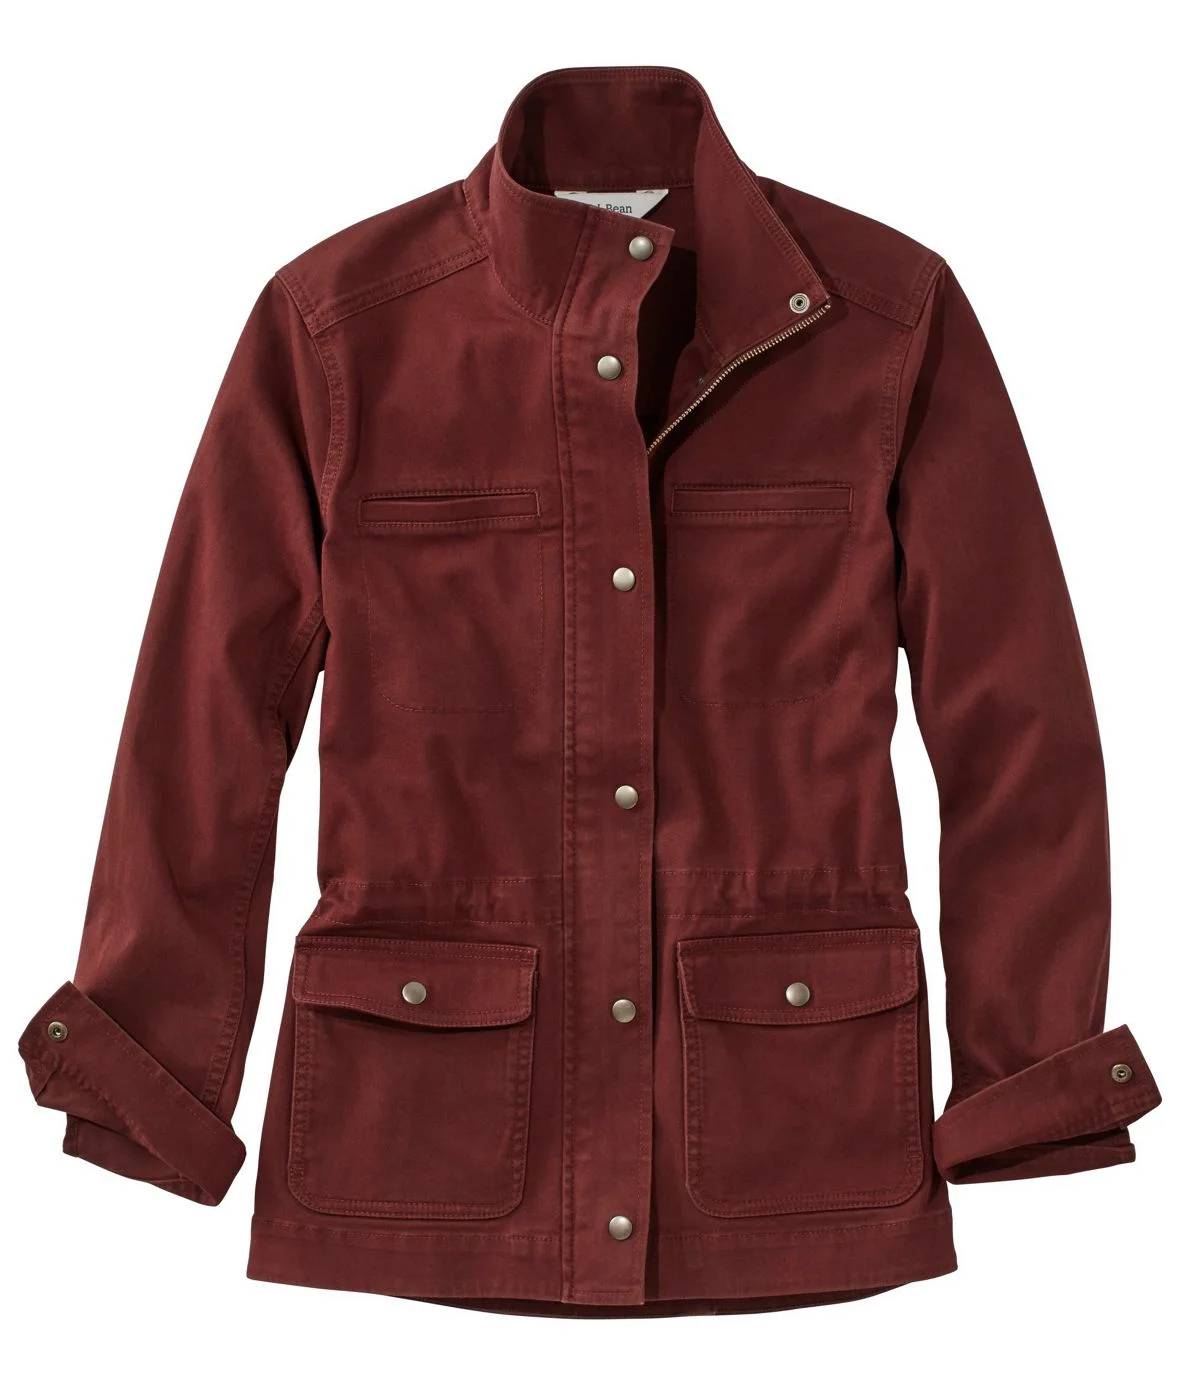 Women's Classic Utility Jacket, Flannel-Lined at L.L. Bean